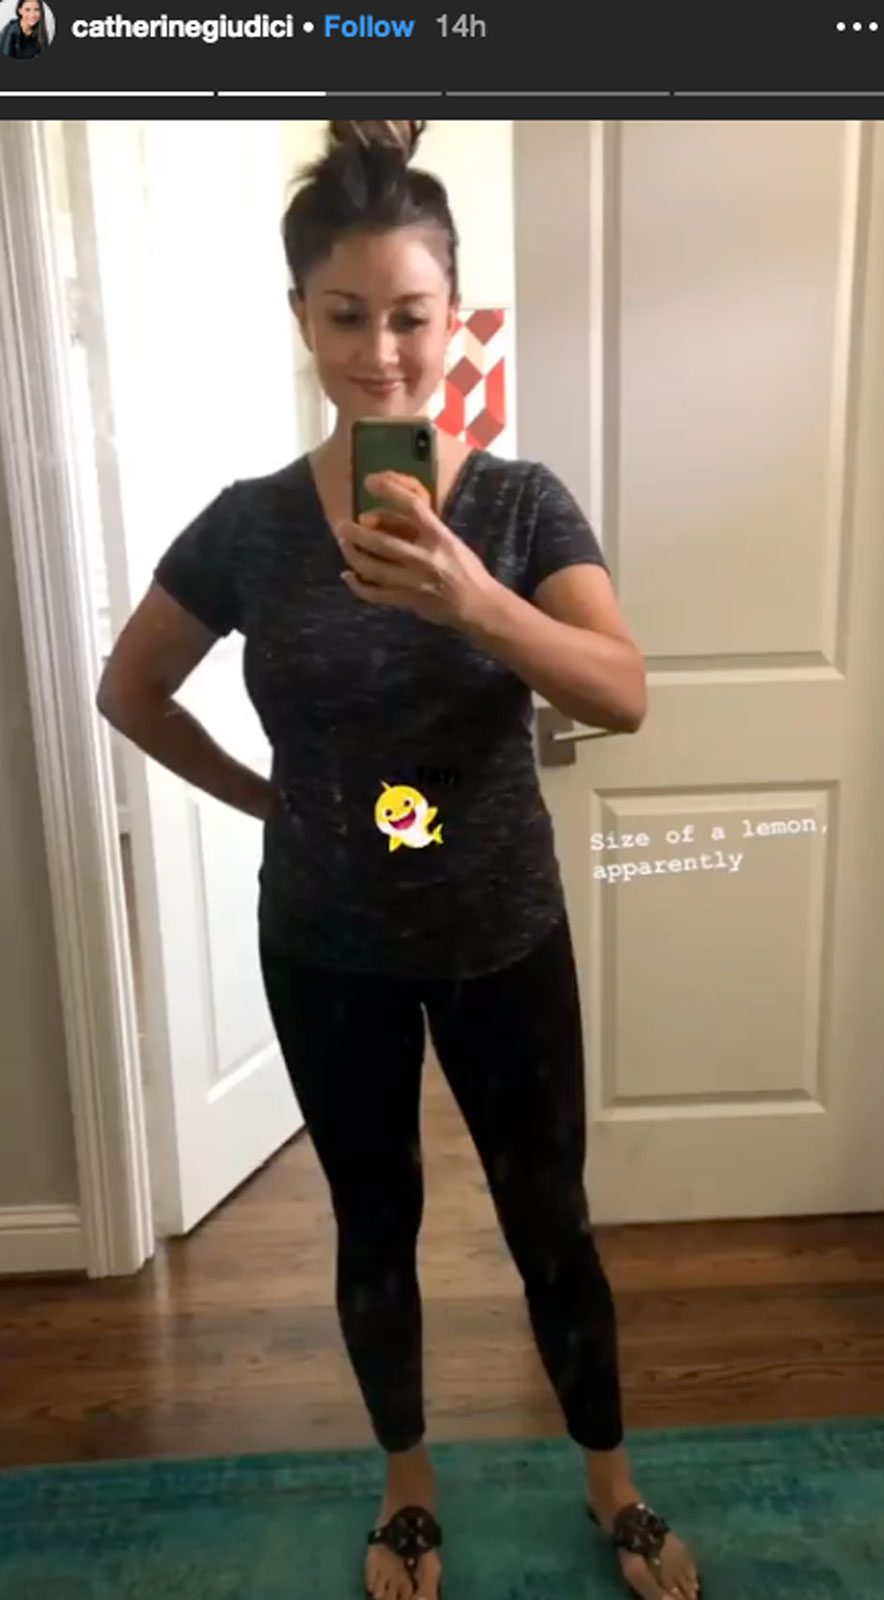 Catherine Giudici Shows Off Baby Bump 1 Week After Pregnancy Announcement ‘Size of a Lemon’ Instagram Story